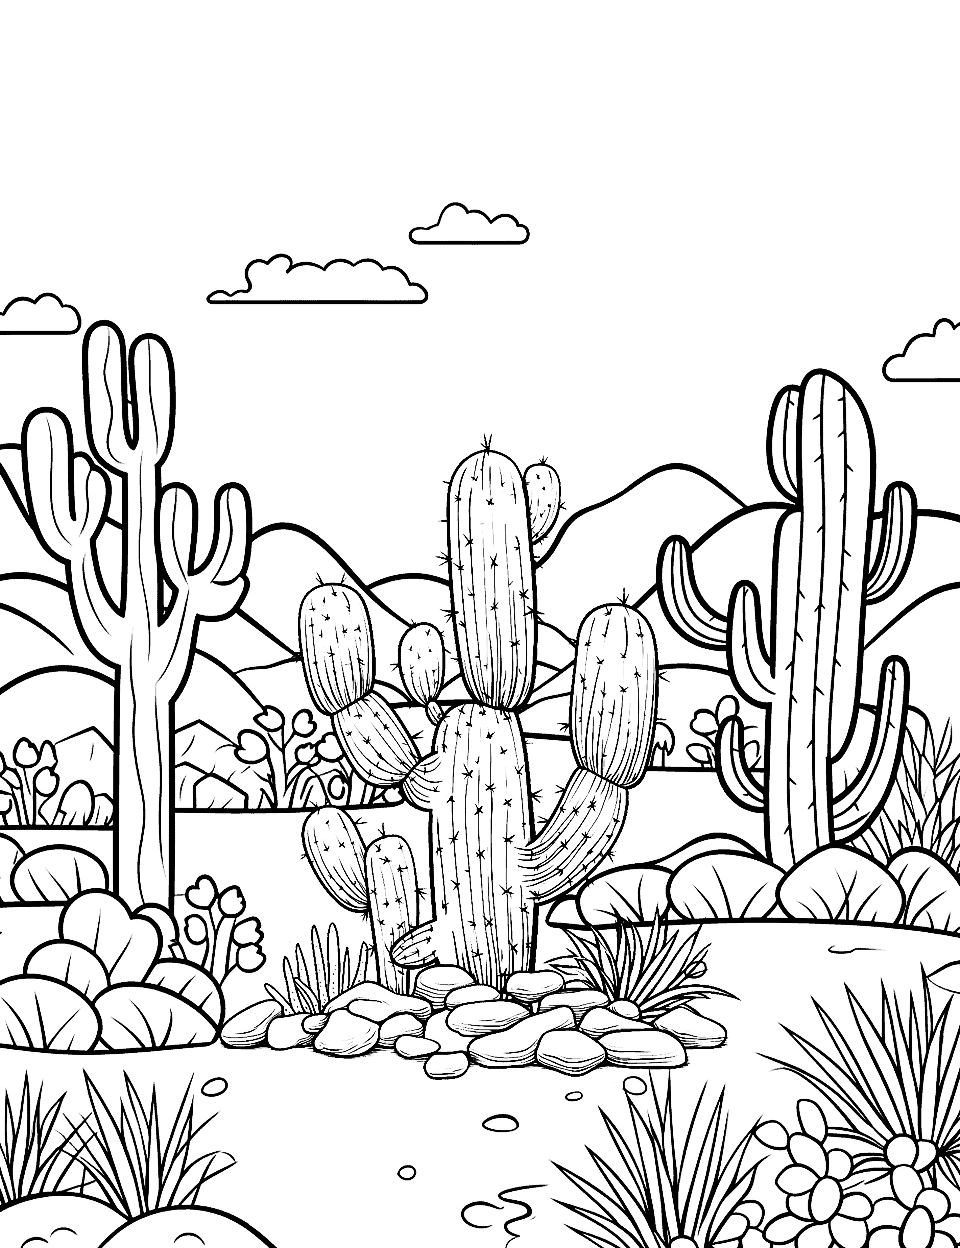 Cactus Garden Nature Coloring Page - A scene showing a variety of cacti in a desert-like area.